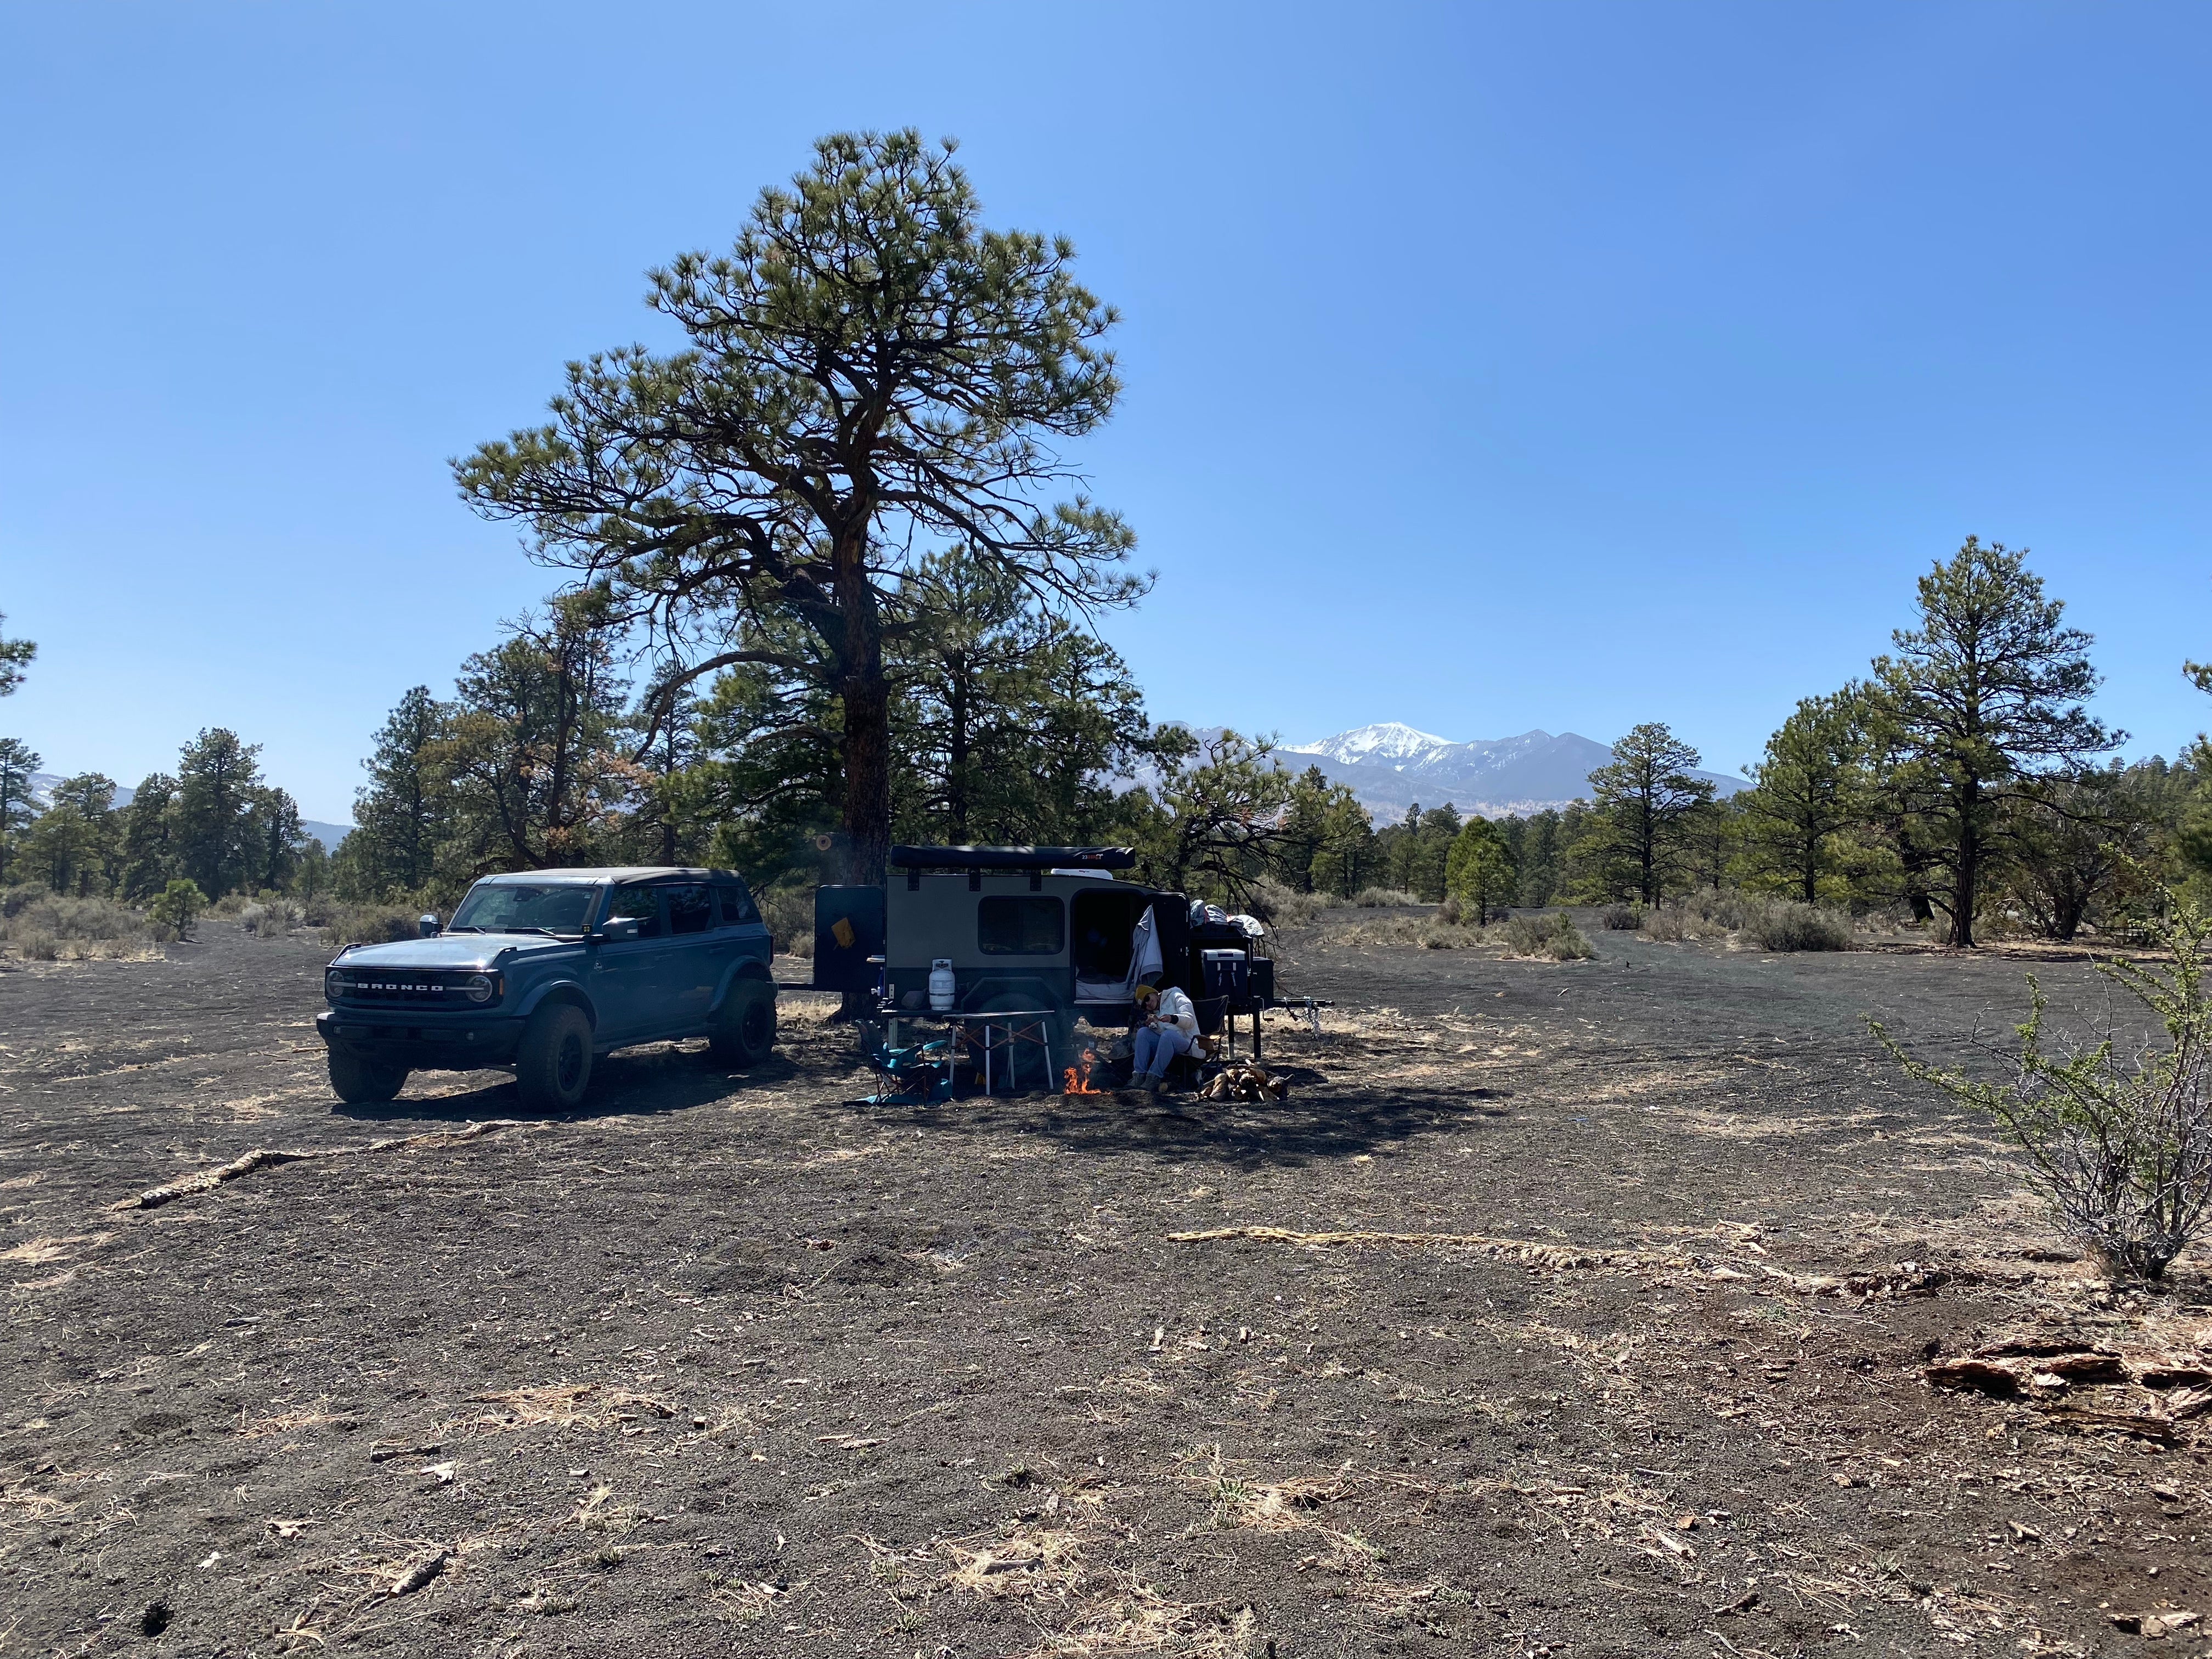 Camper submitted image from Cinder Hills Off Highway Vehicle Area - 5